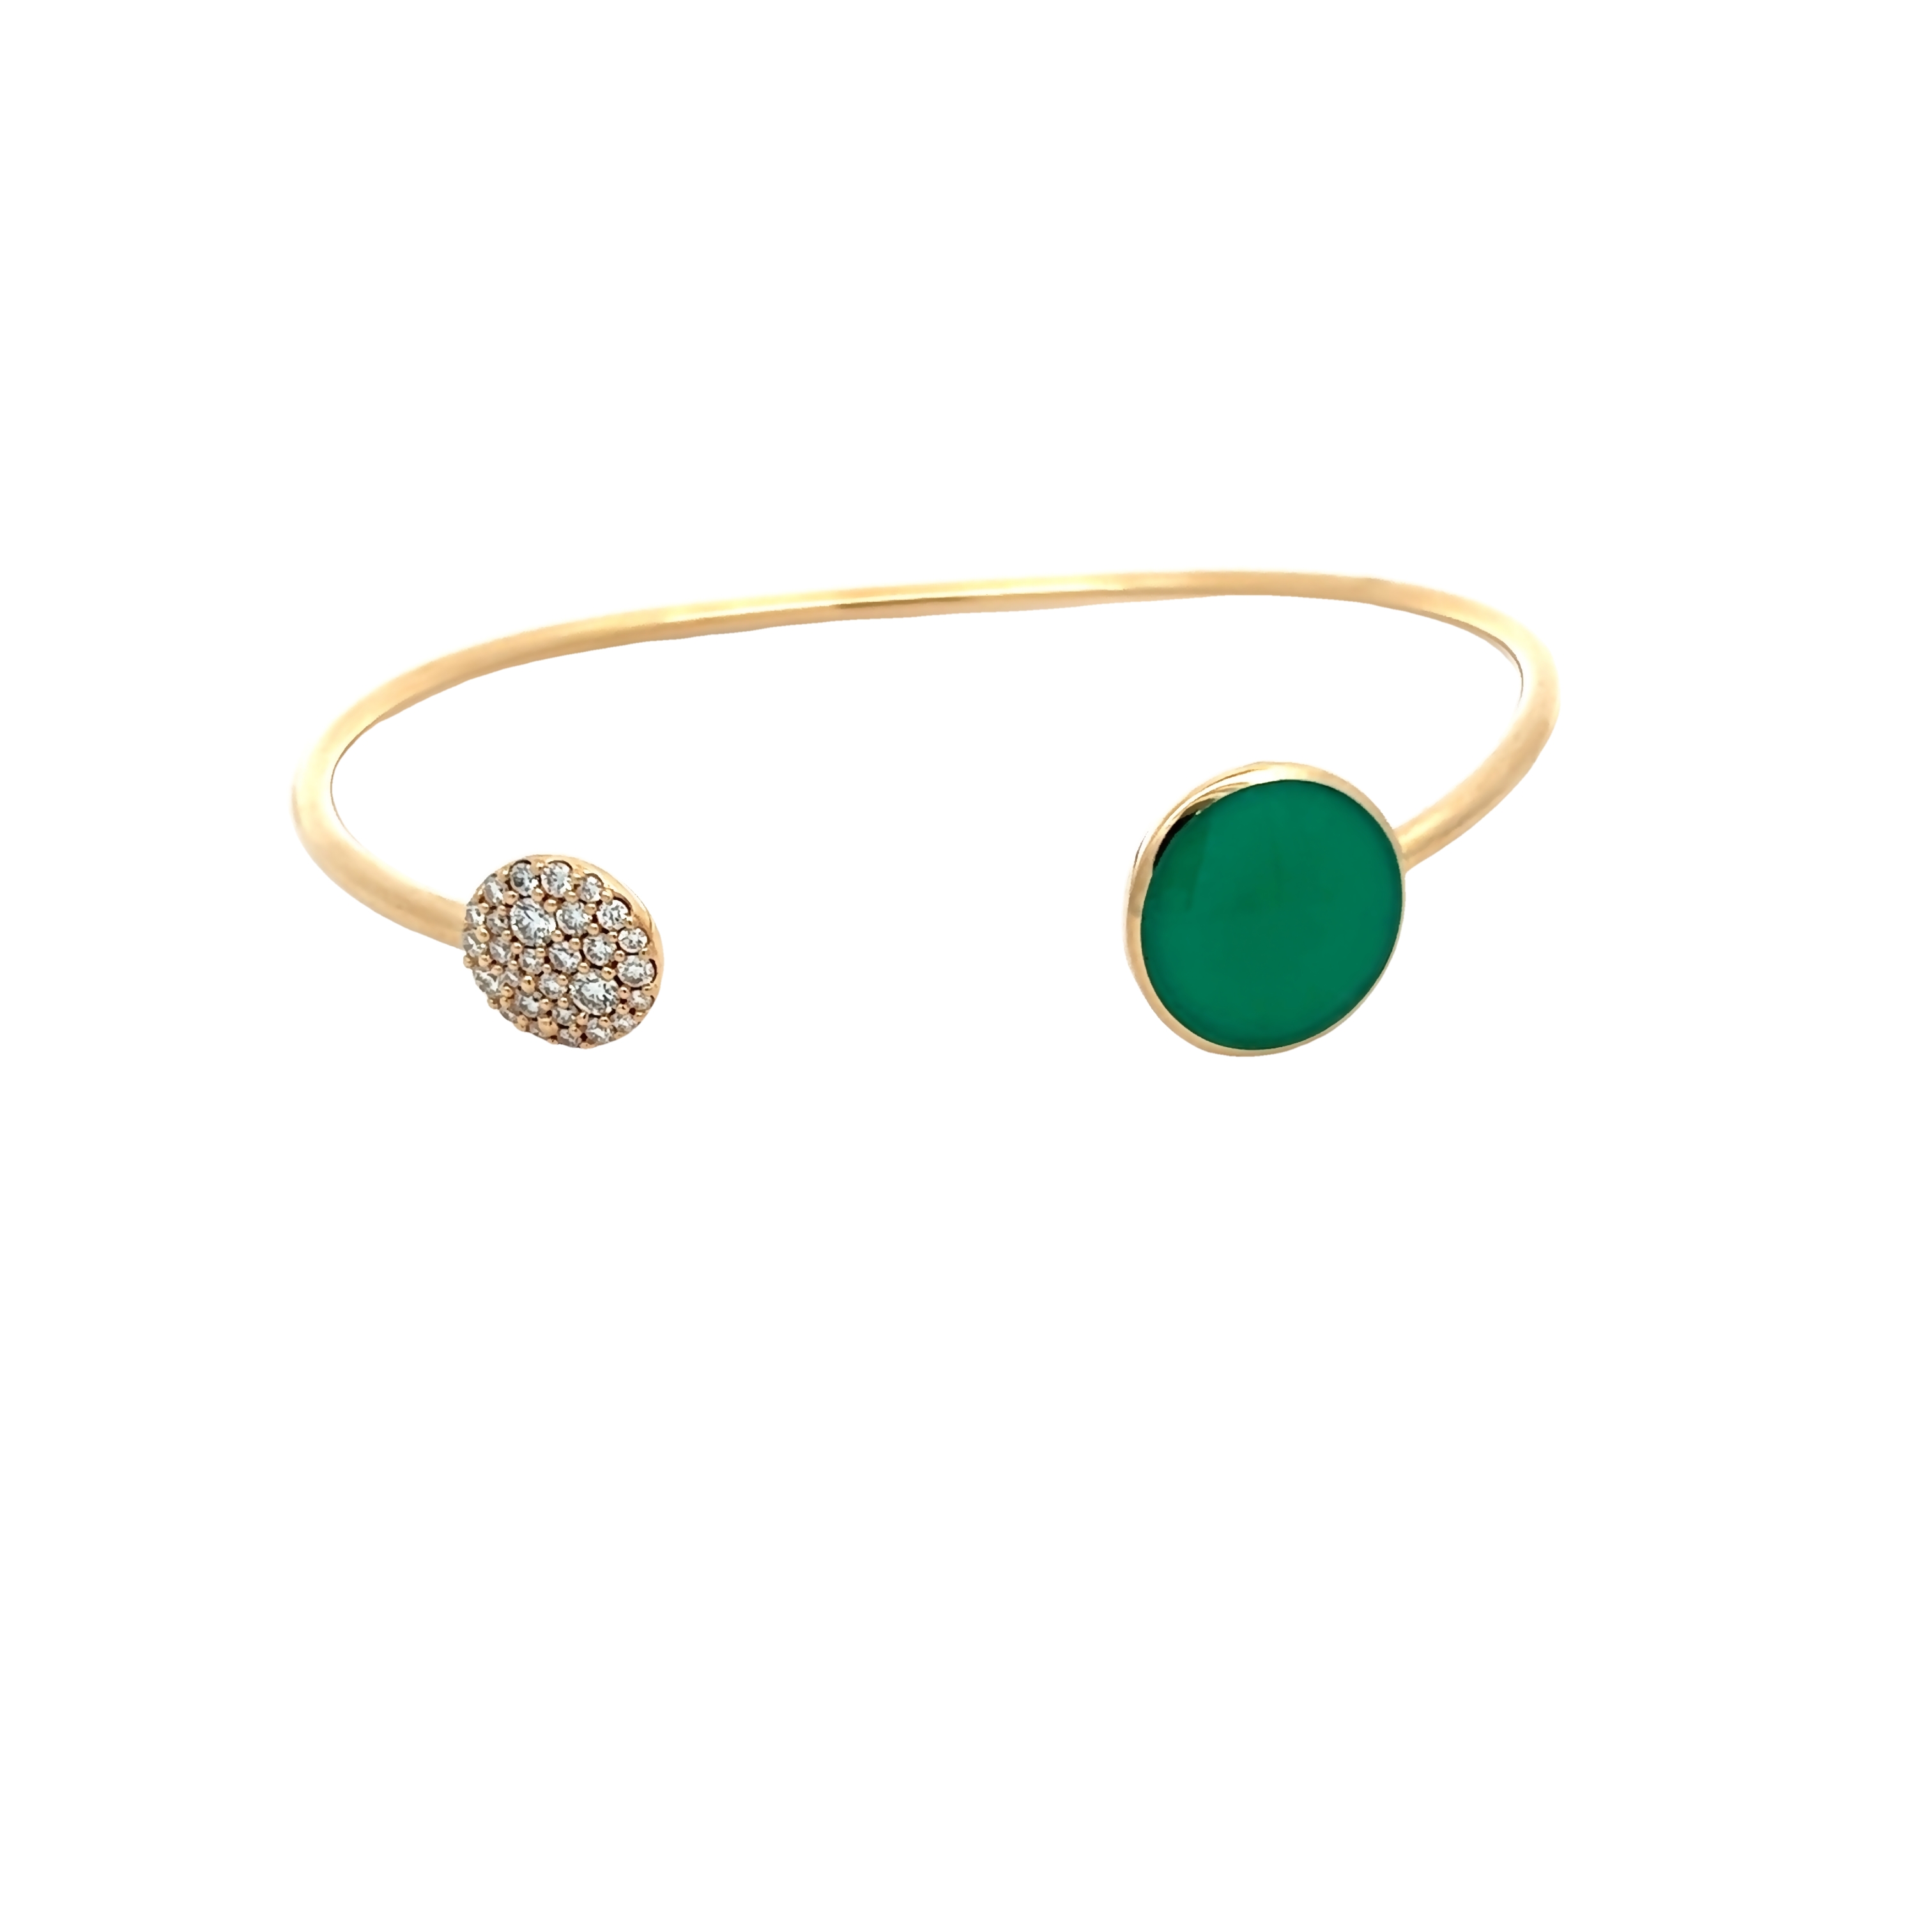 14 Karat Yellow Gold Open Bangle Bracelet With 29= .40 Total Weight Round Brilliant Diamonds And Chrysoprase Inlay.